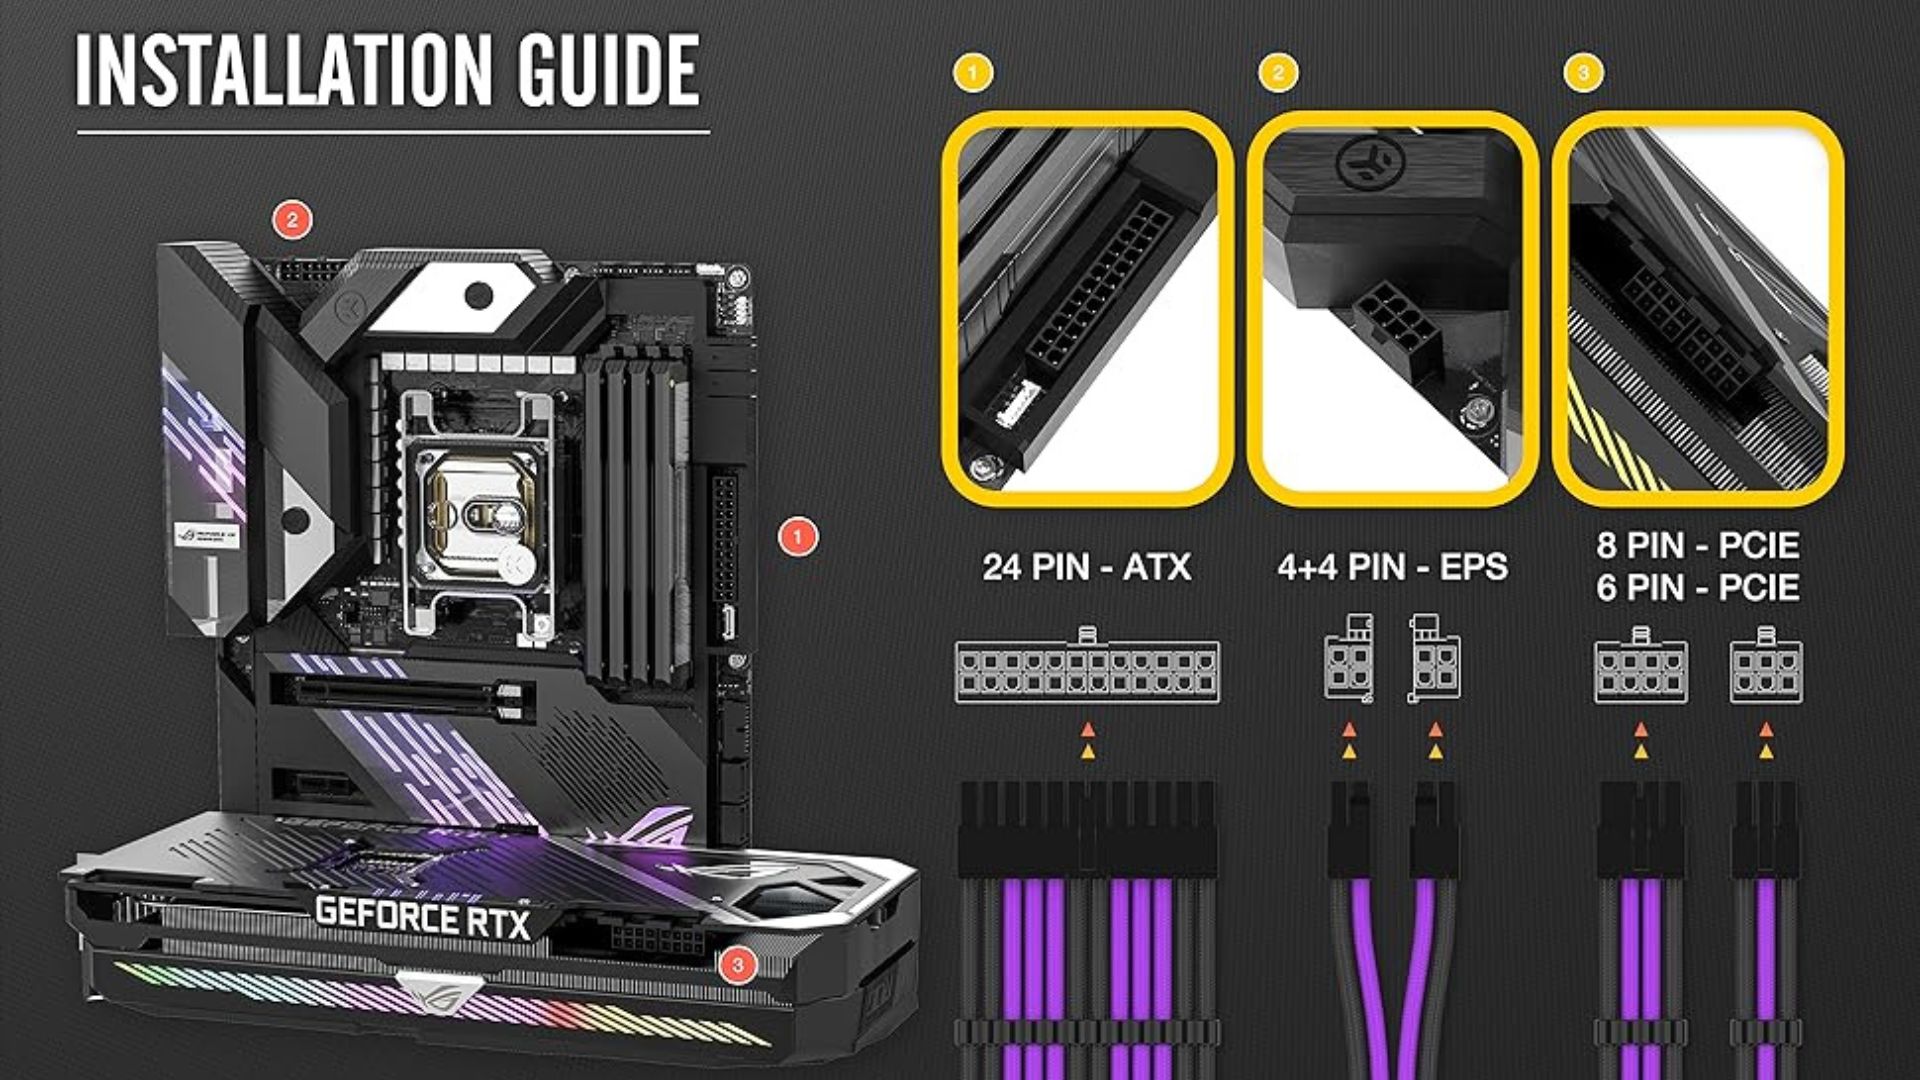 Which Cables Do I Need for My PSU